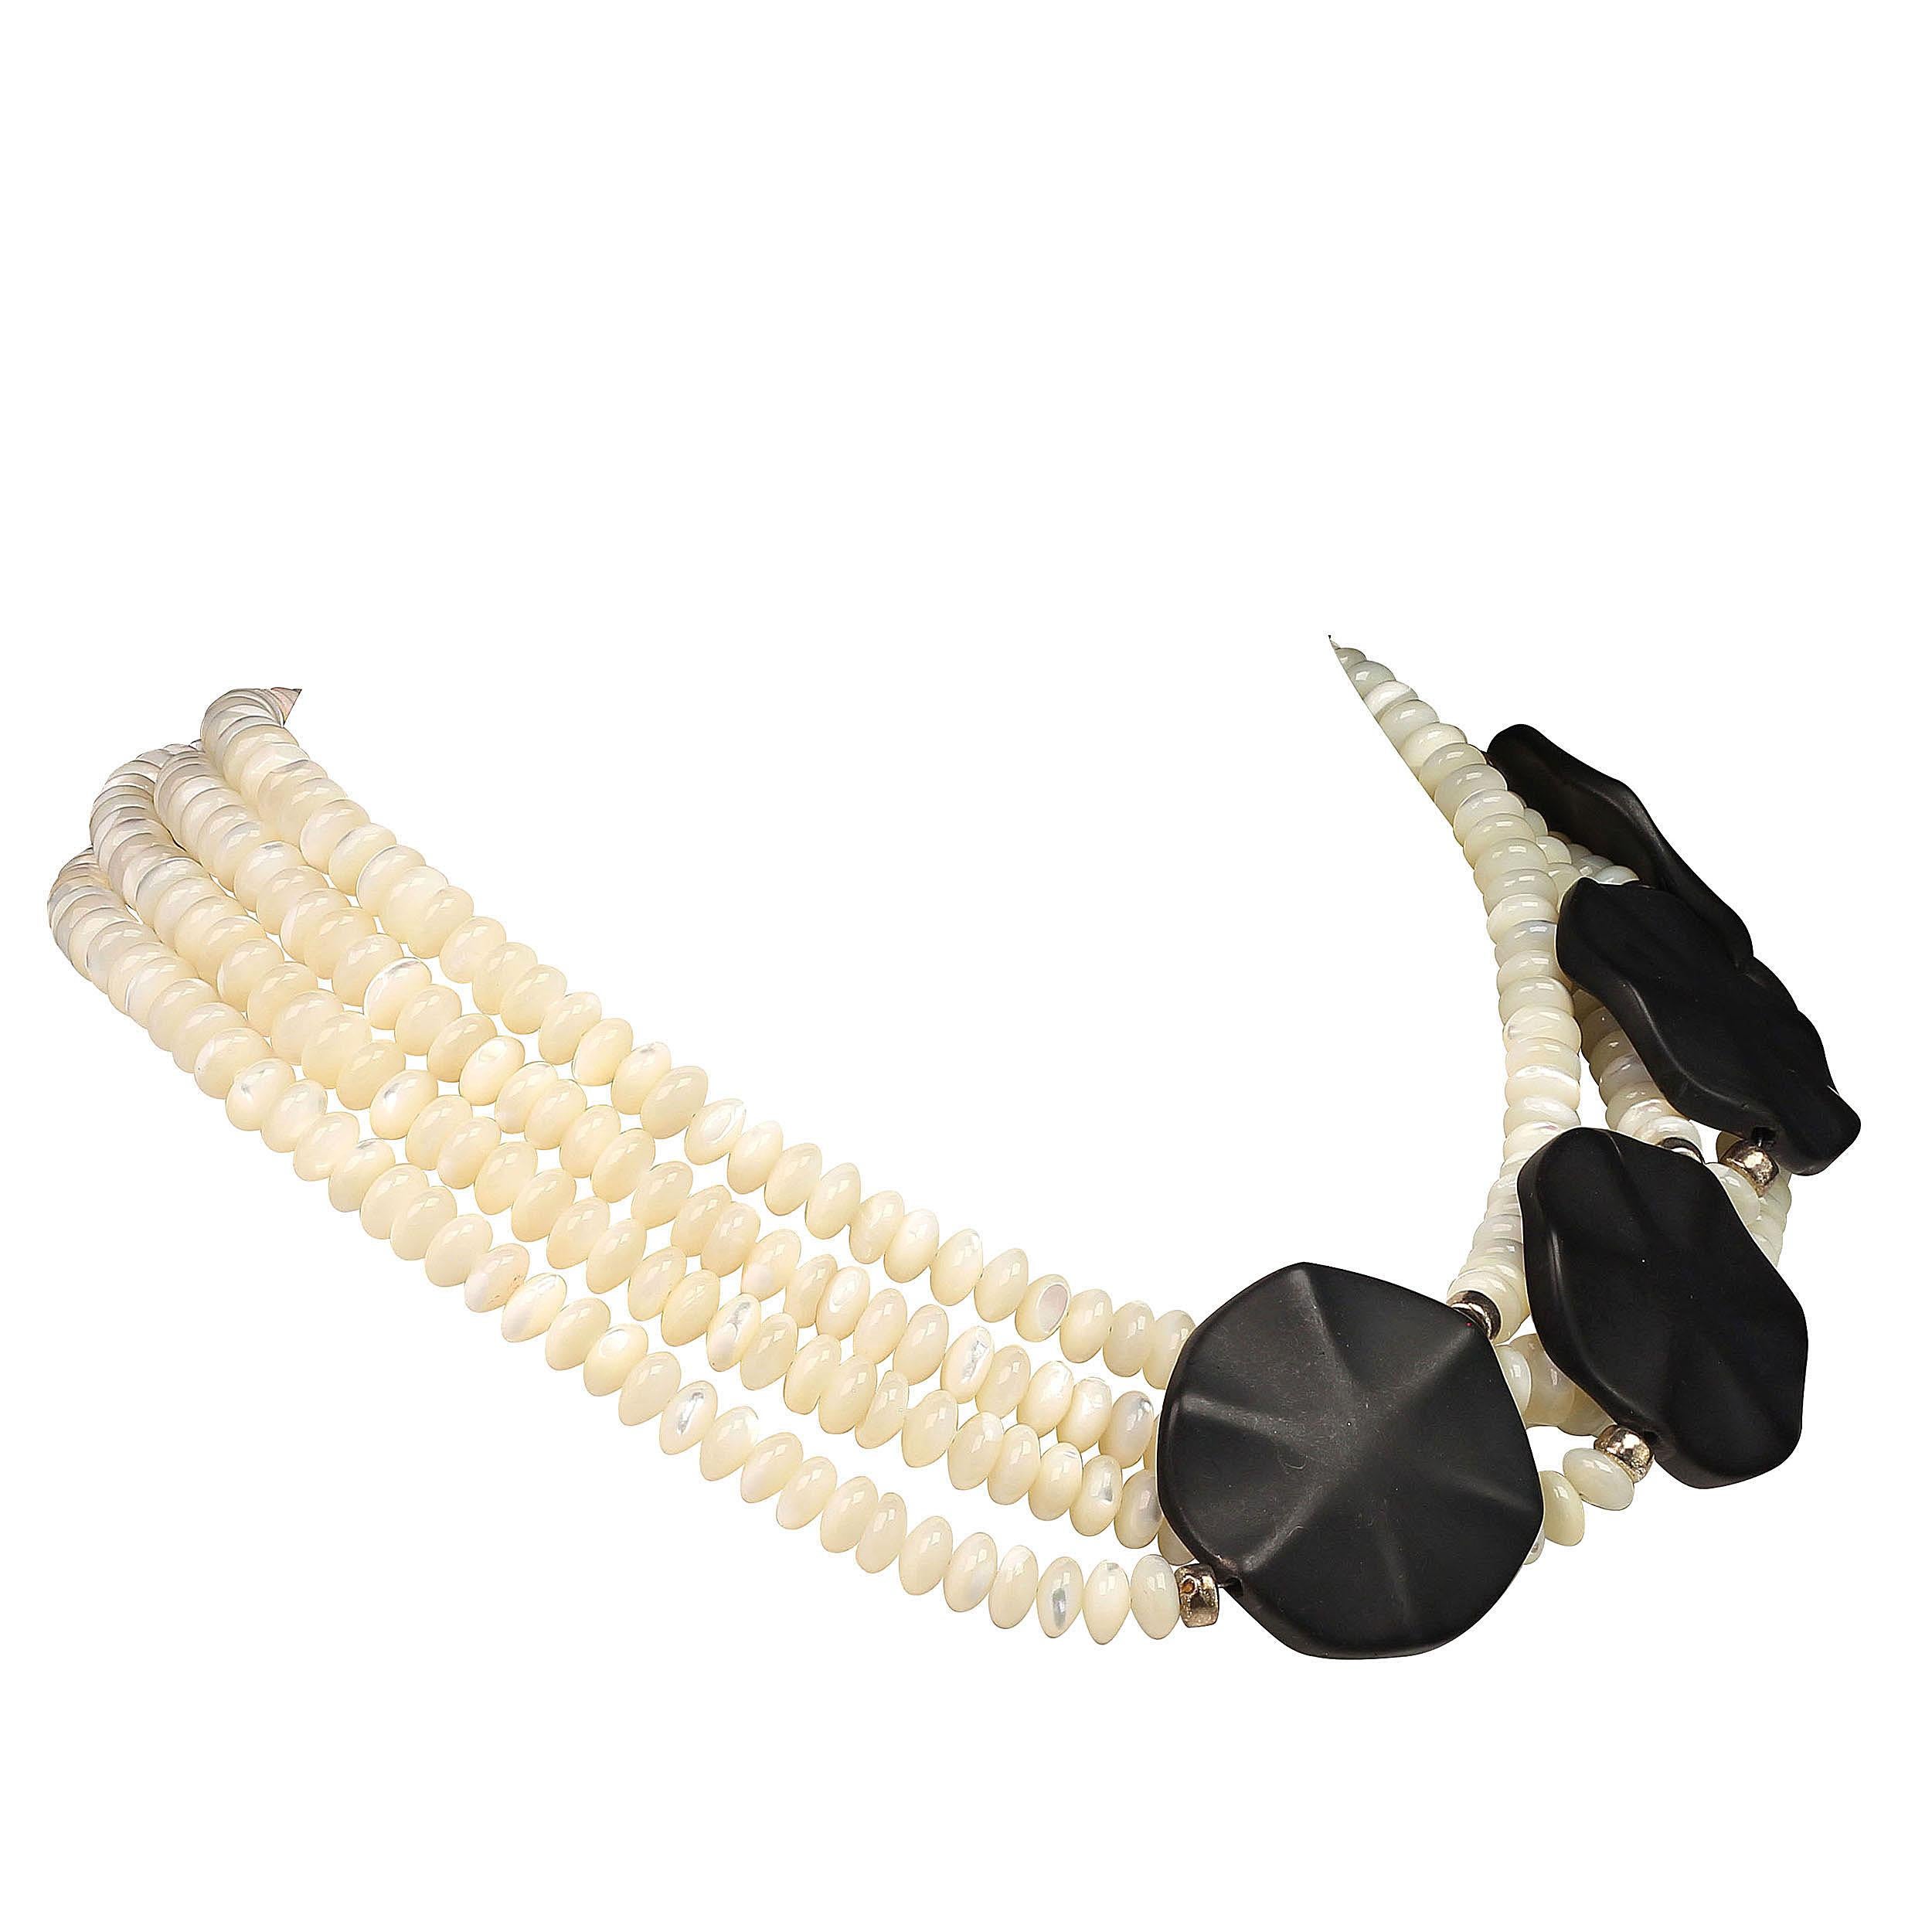 AJD Mother of Pearl Necklace with Black Discs